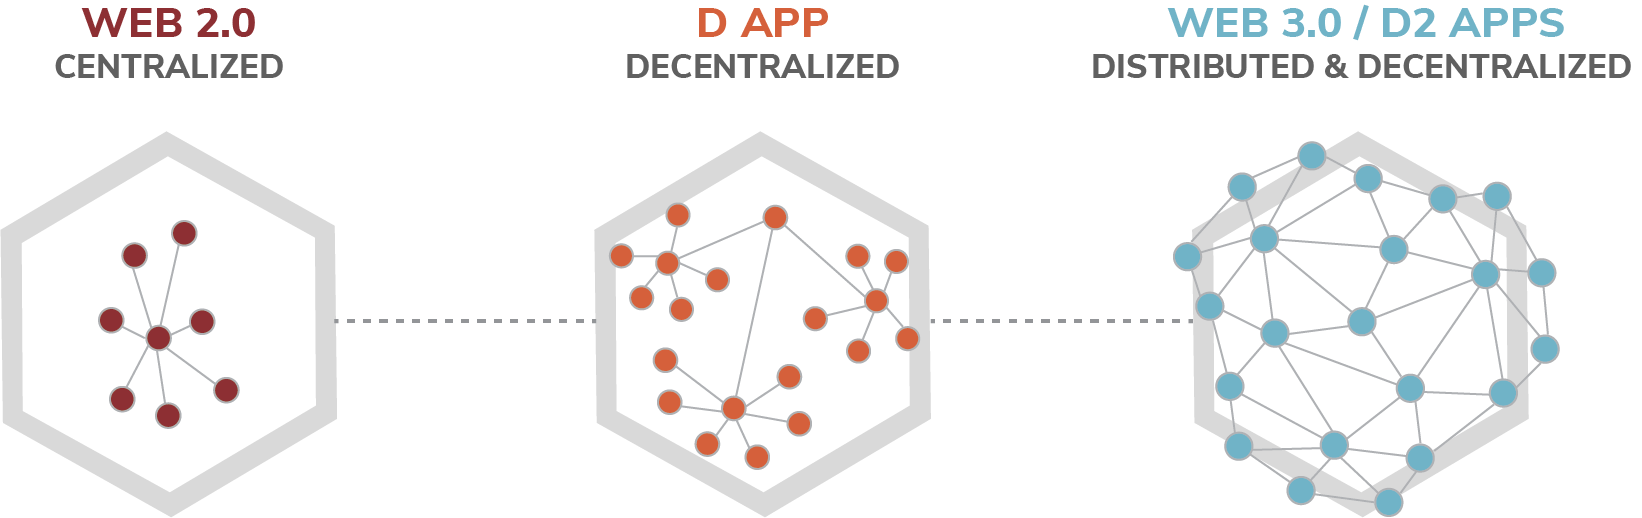 Distributed, Decentralized